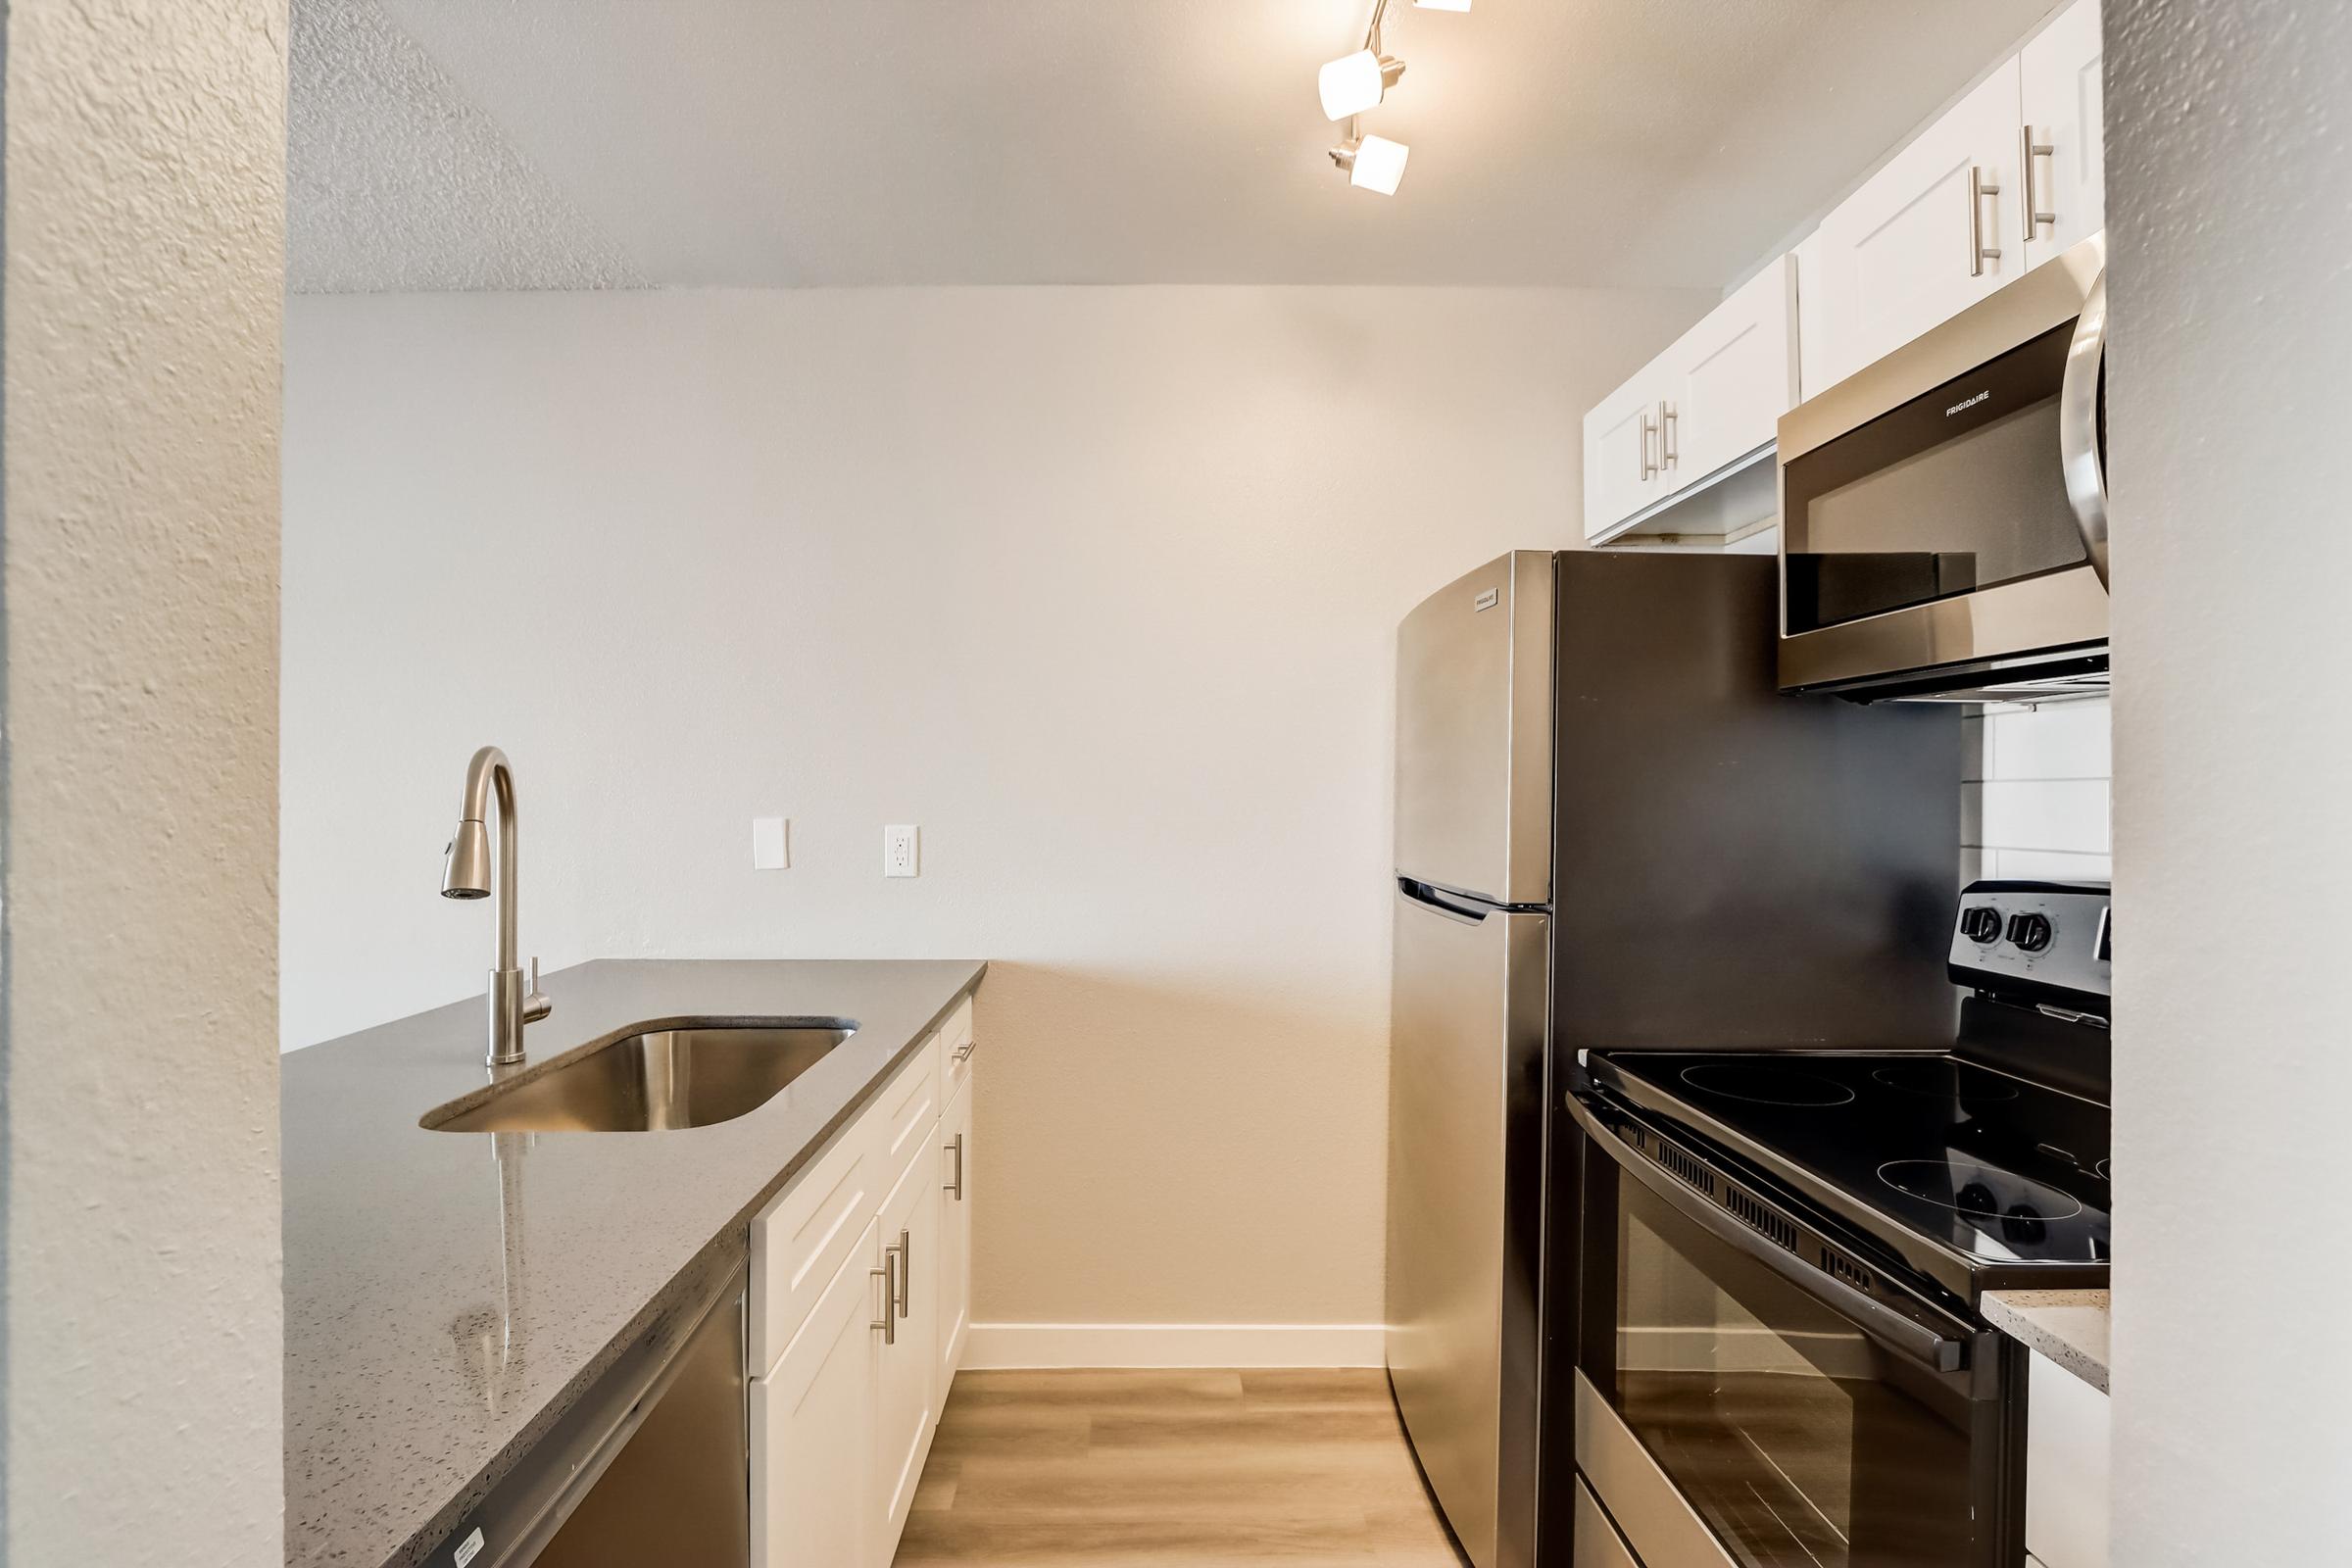 A galley kitchen with stainless steel appliances and a view of the living area at Rise at the Lofts.